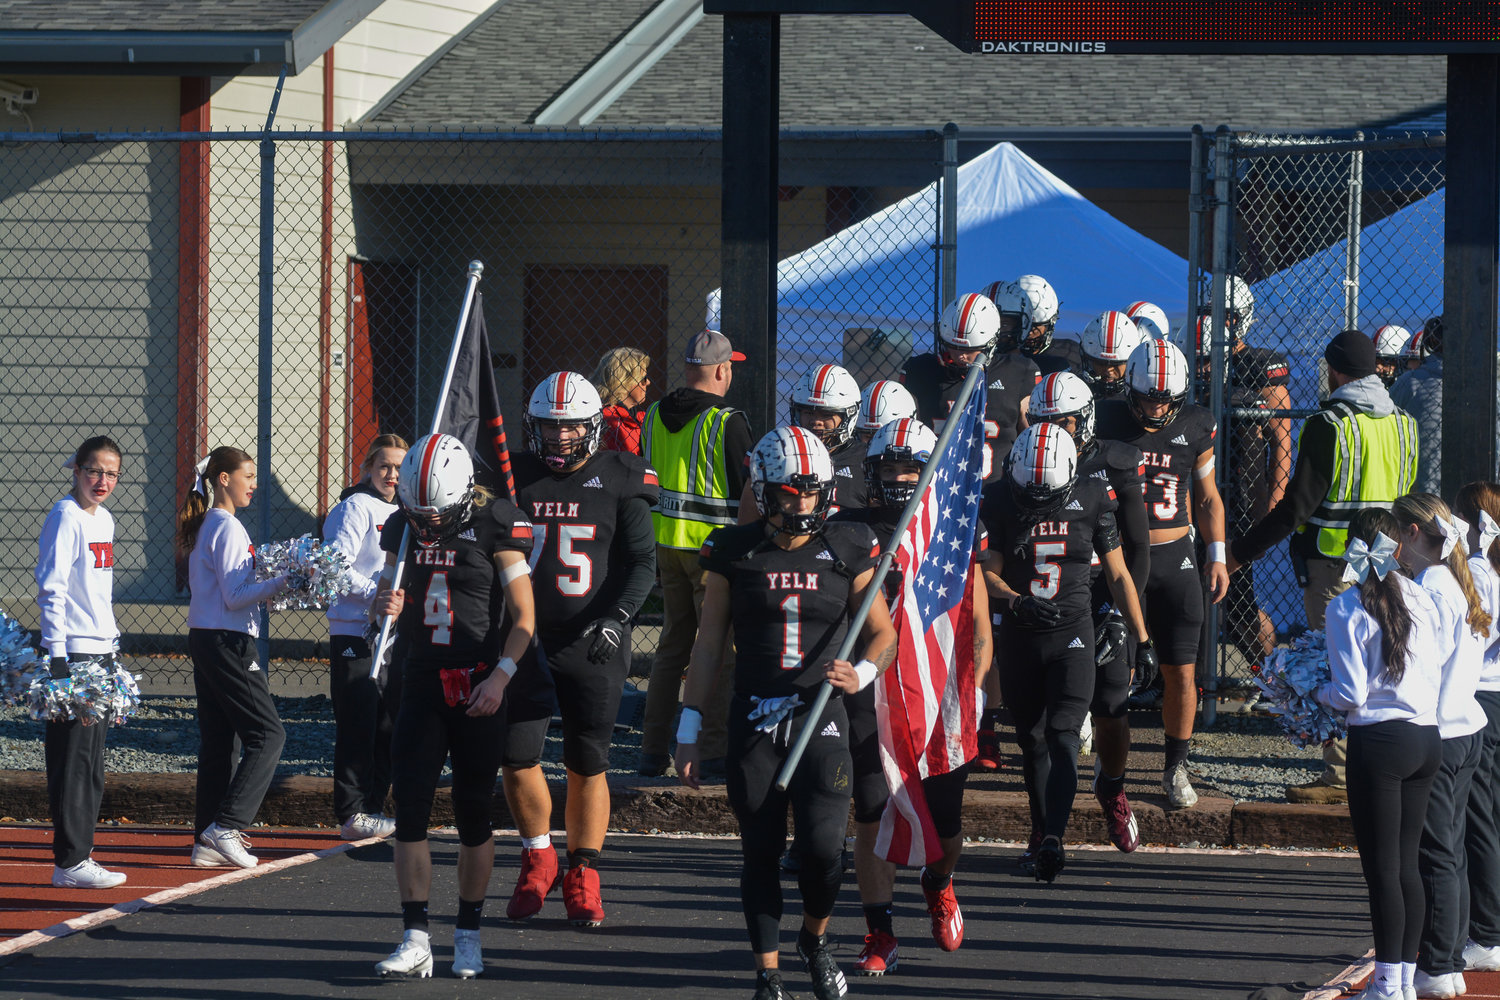 Seniors Aden Schaler (4) and Ray Wright (1) lead the Tornados onto the field prior to their matchup against Kennewick on Saturday, Nov. 19.